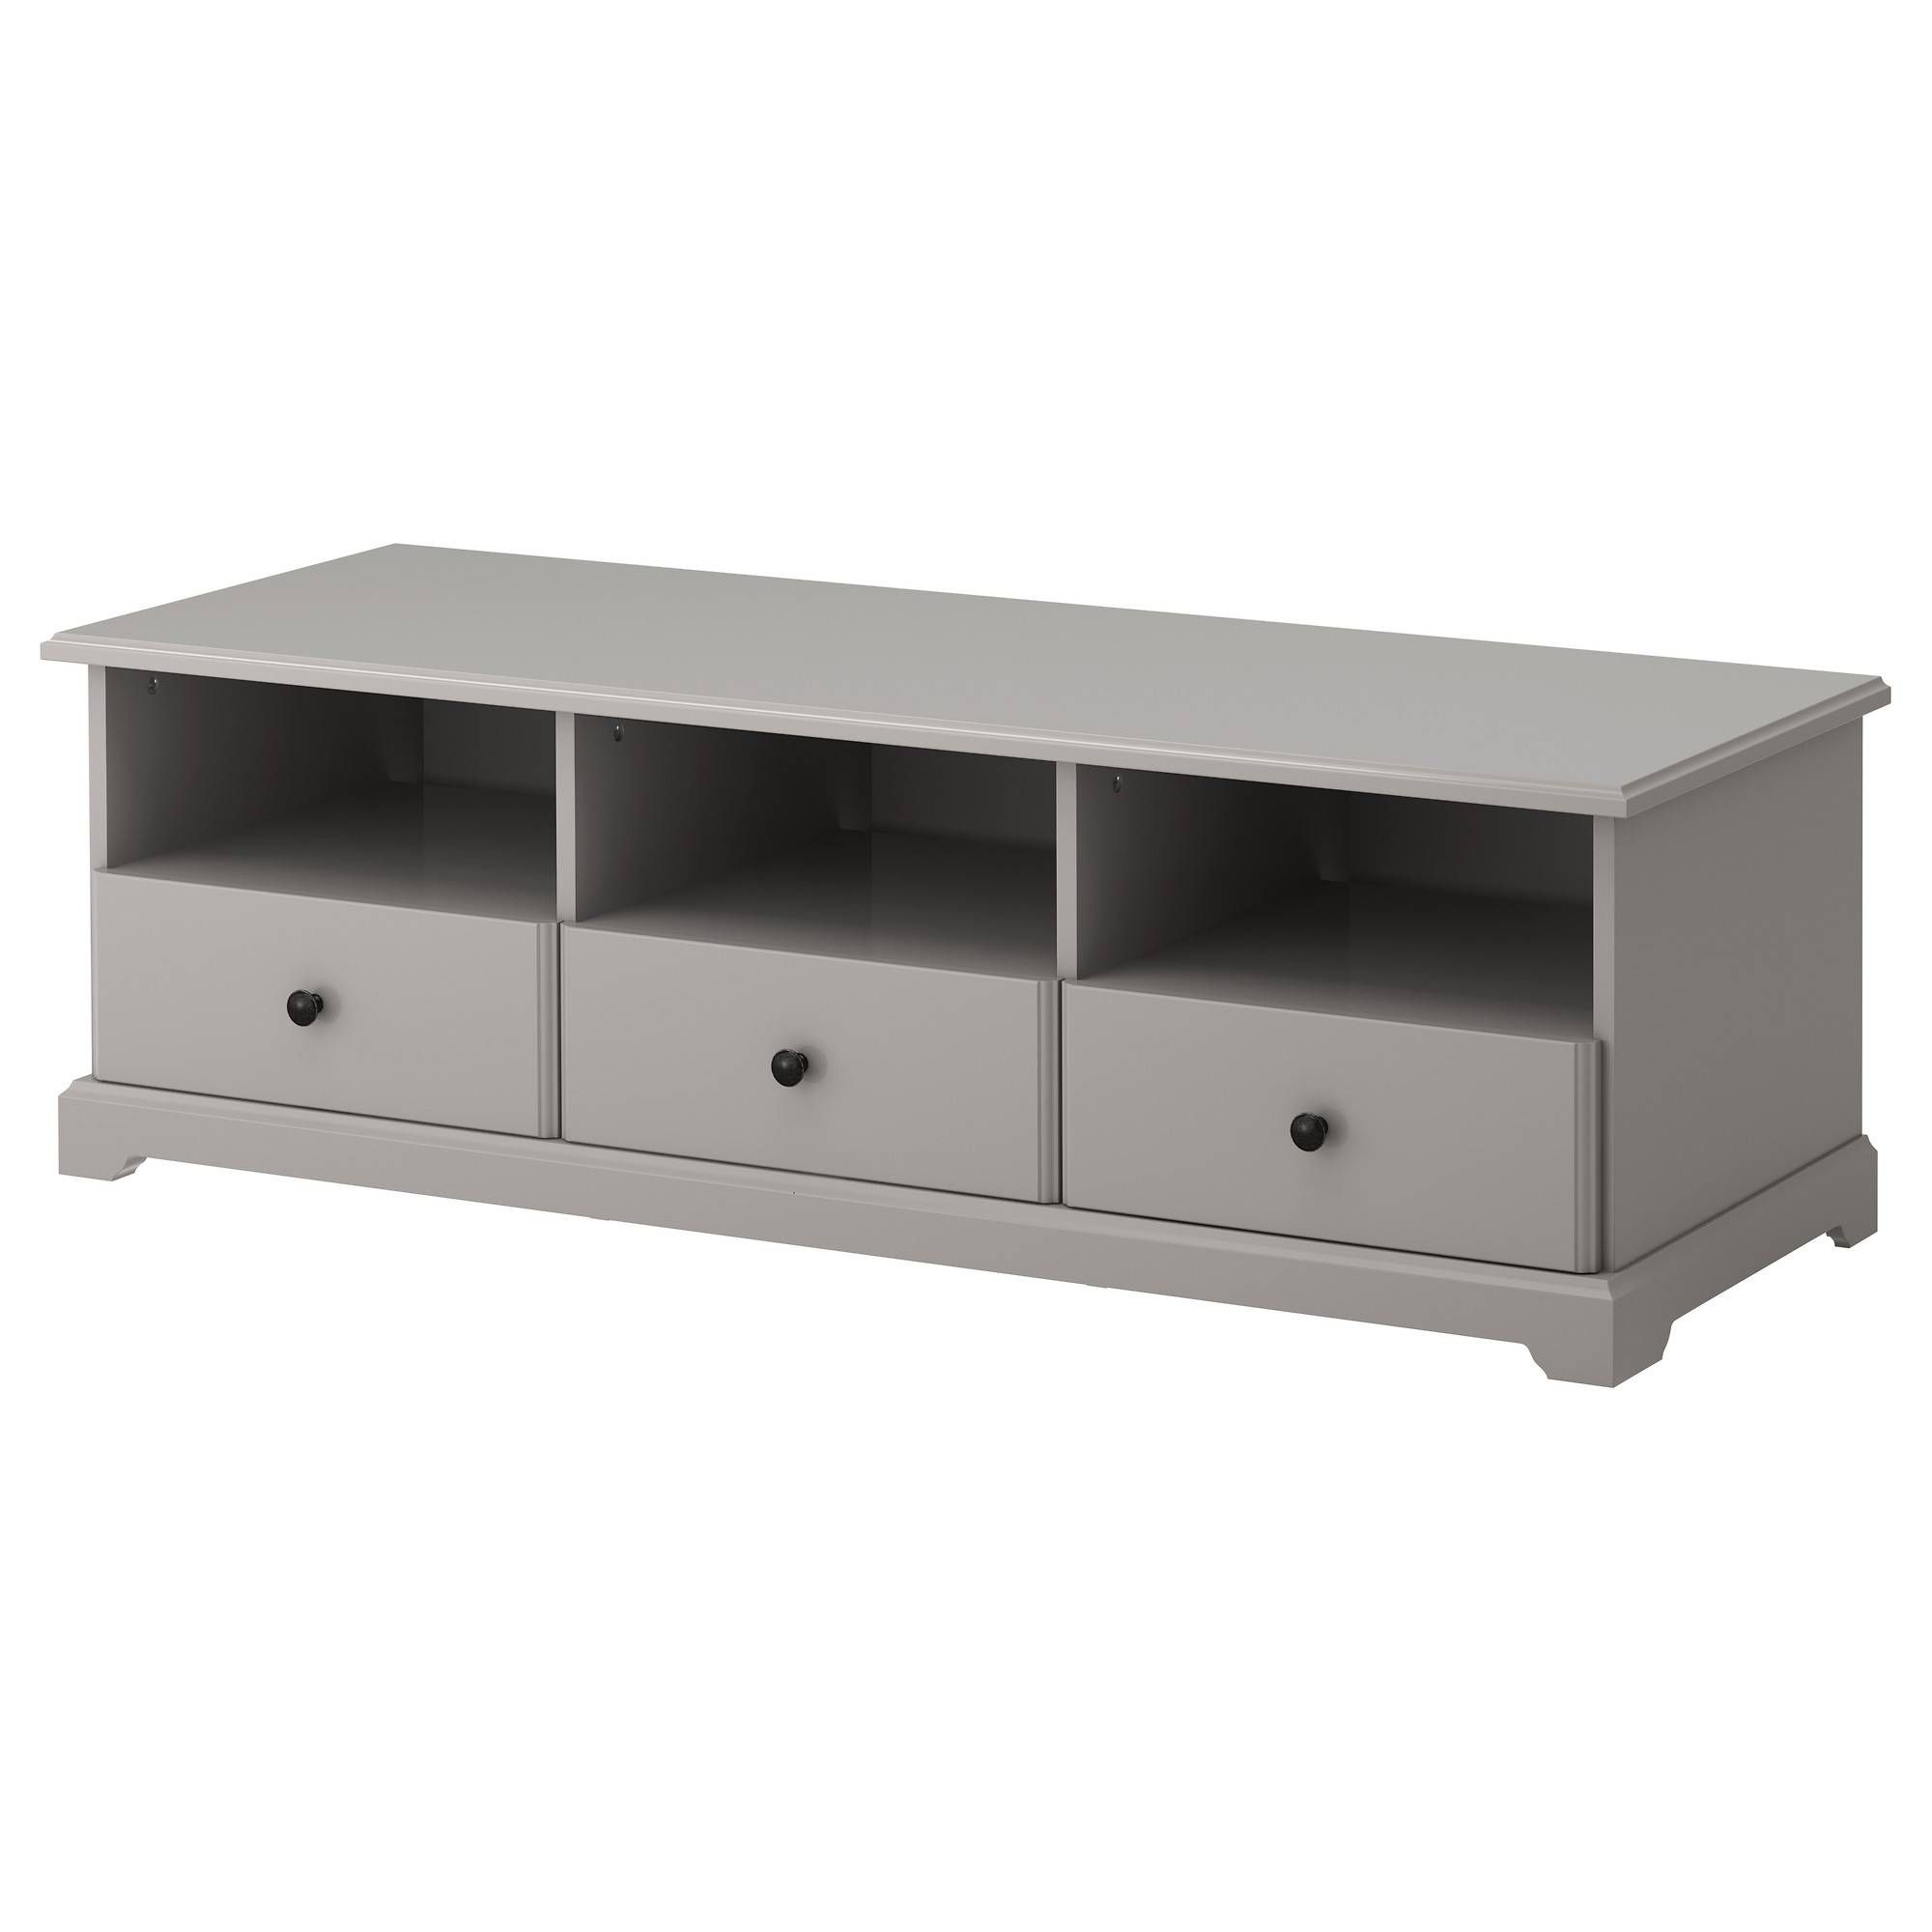 Tv Stands & Tv Units | Ikea Intended For White Tv Cabinets (View 6 of 15)